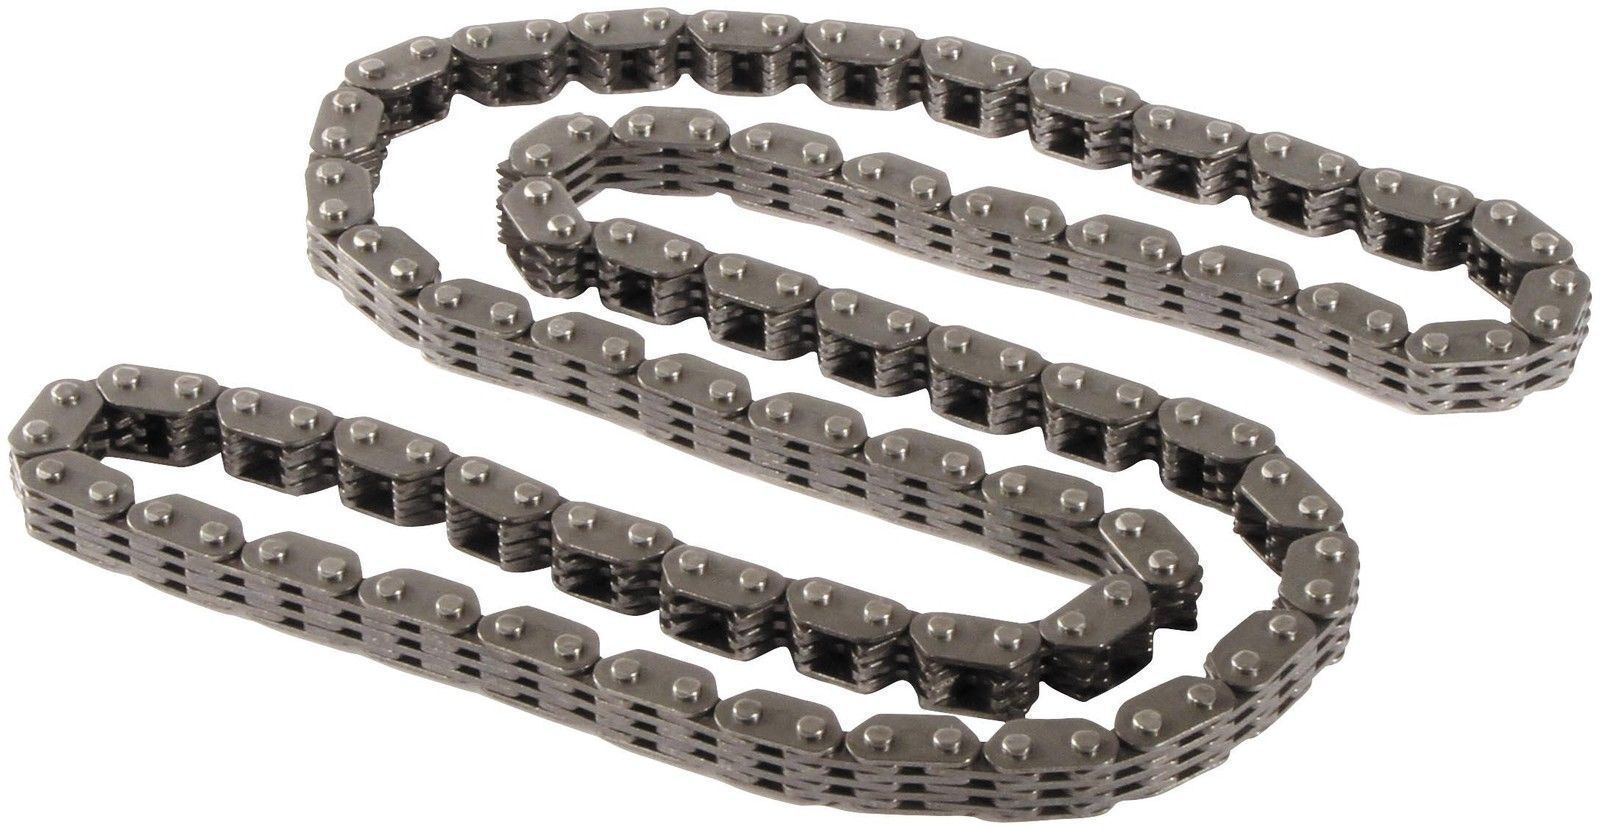 New Hot Cams Cam Timing Chain For 2004-2006 Yamaha YFM 350 Bruin 2X4 4X4 Auto - $24.95